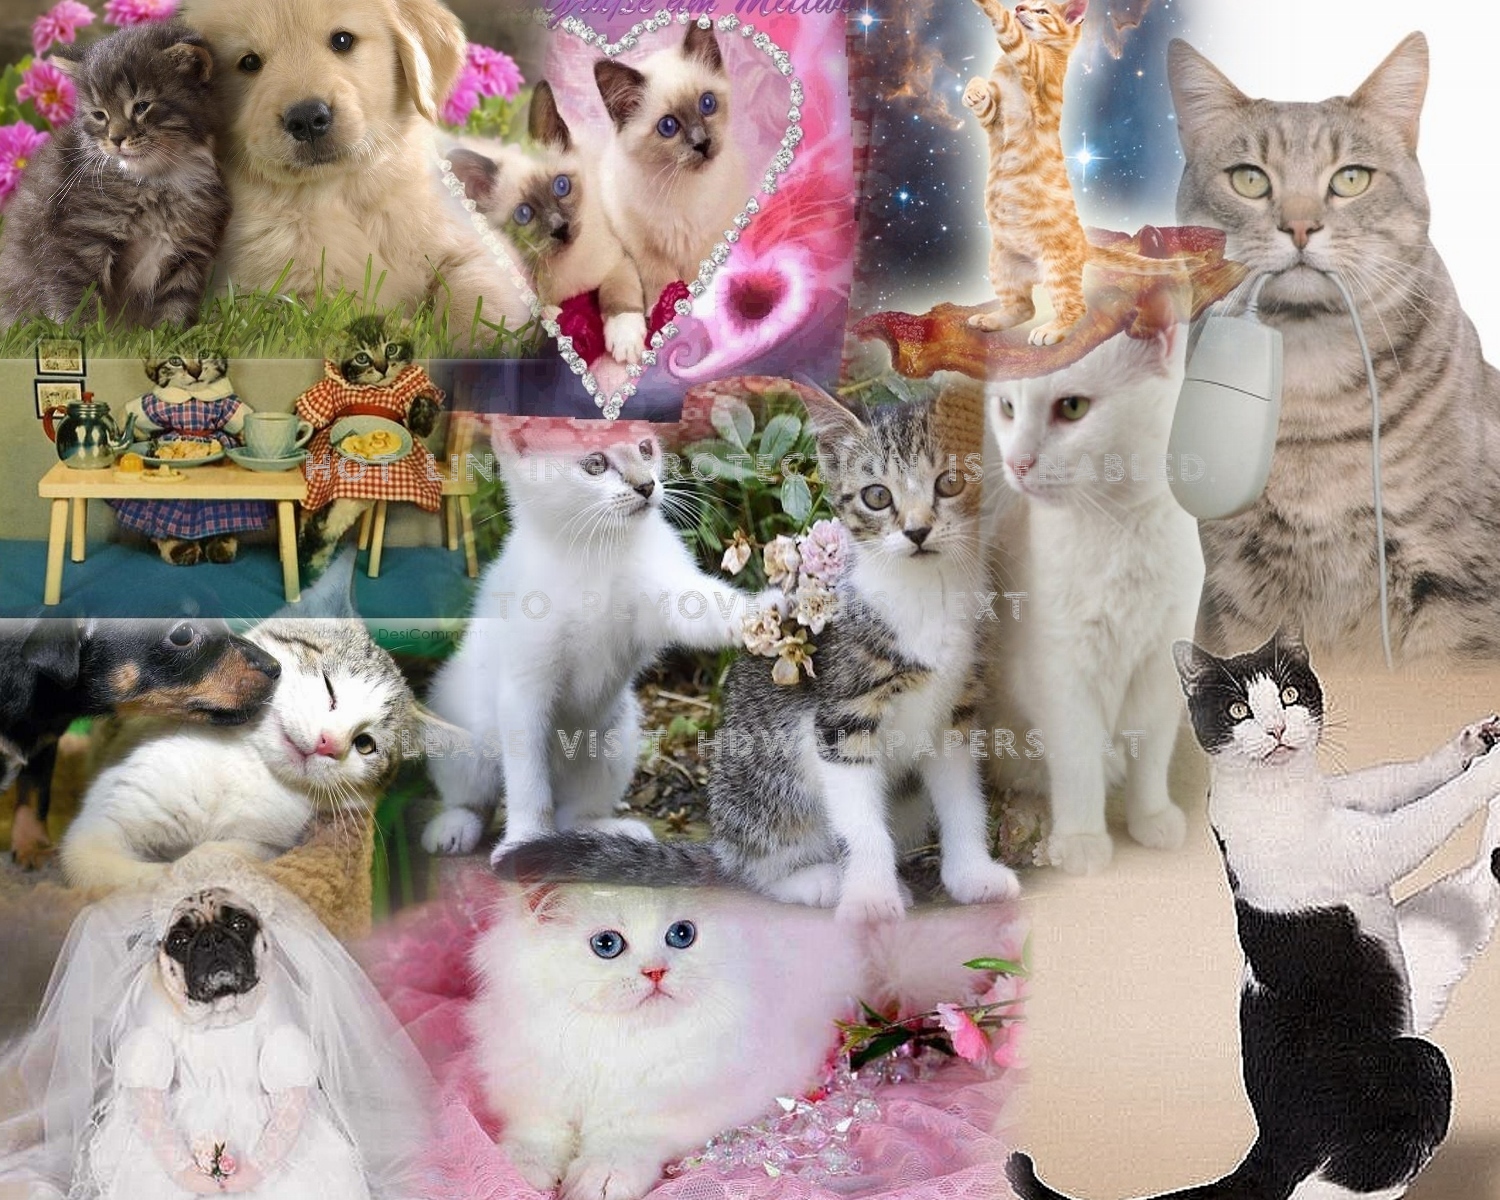 cats and dog collage cute adorable abstract